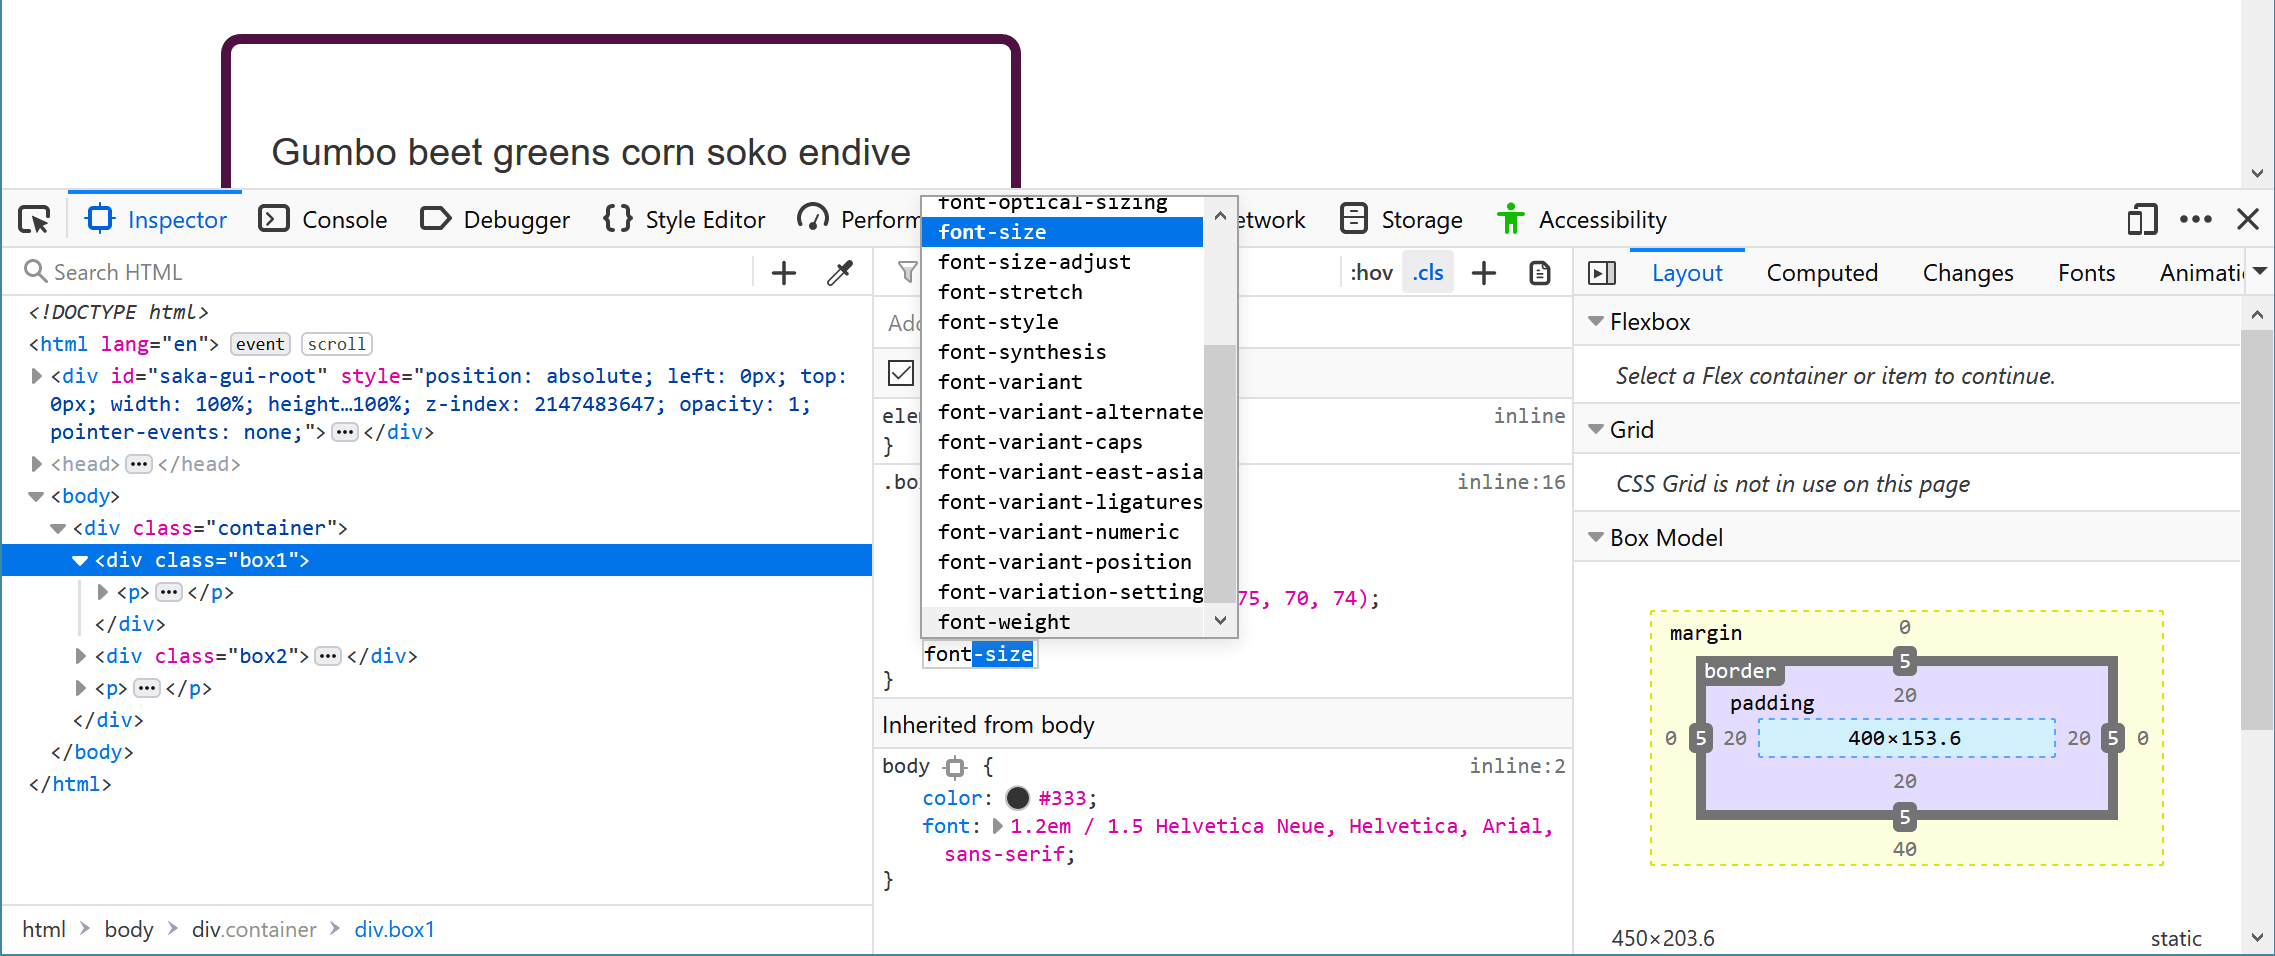 The DevTools Panel, adding a new property to the rules, with the autocomplete for font- open